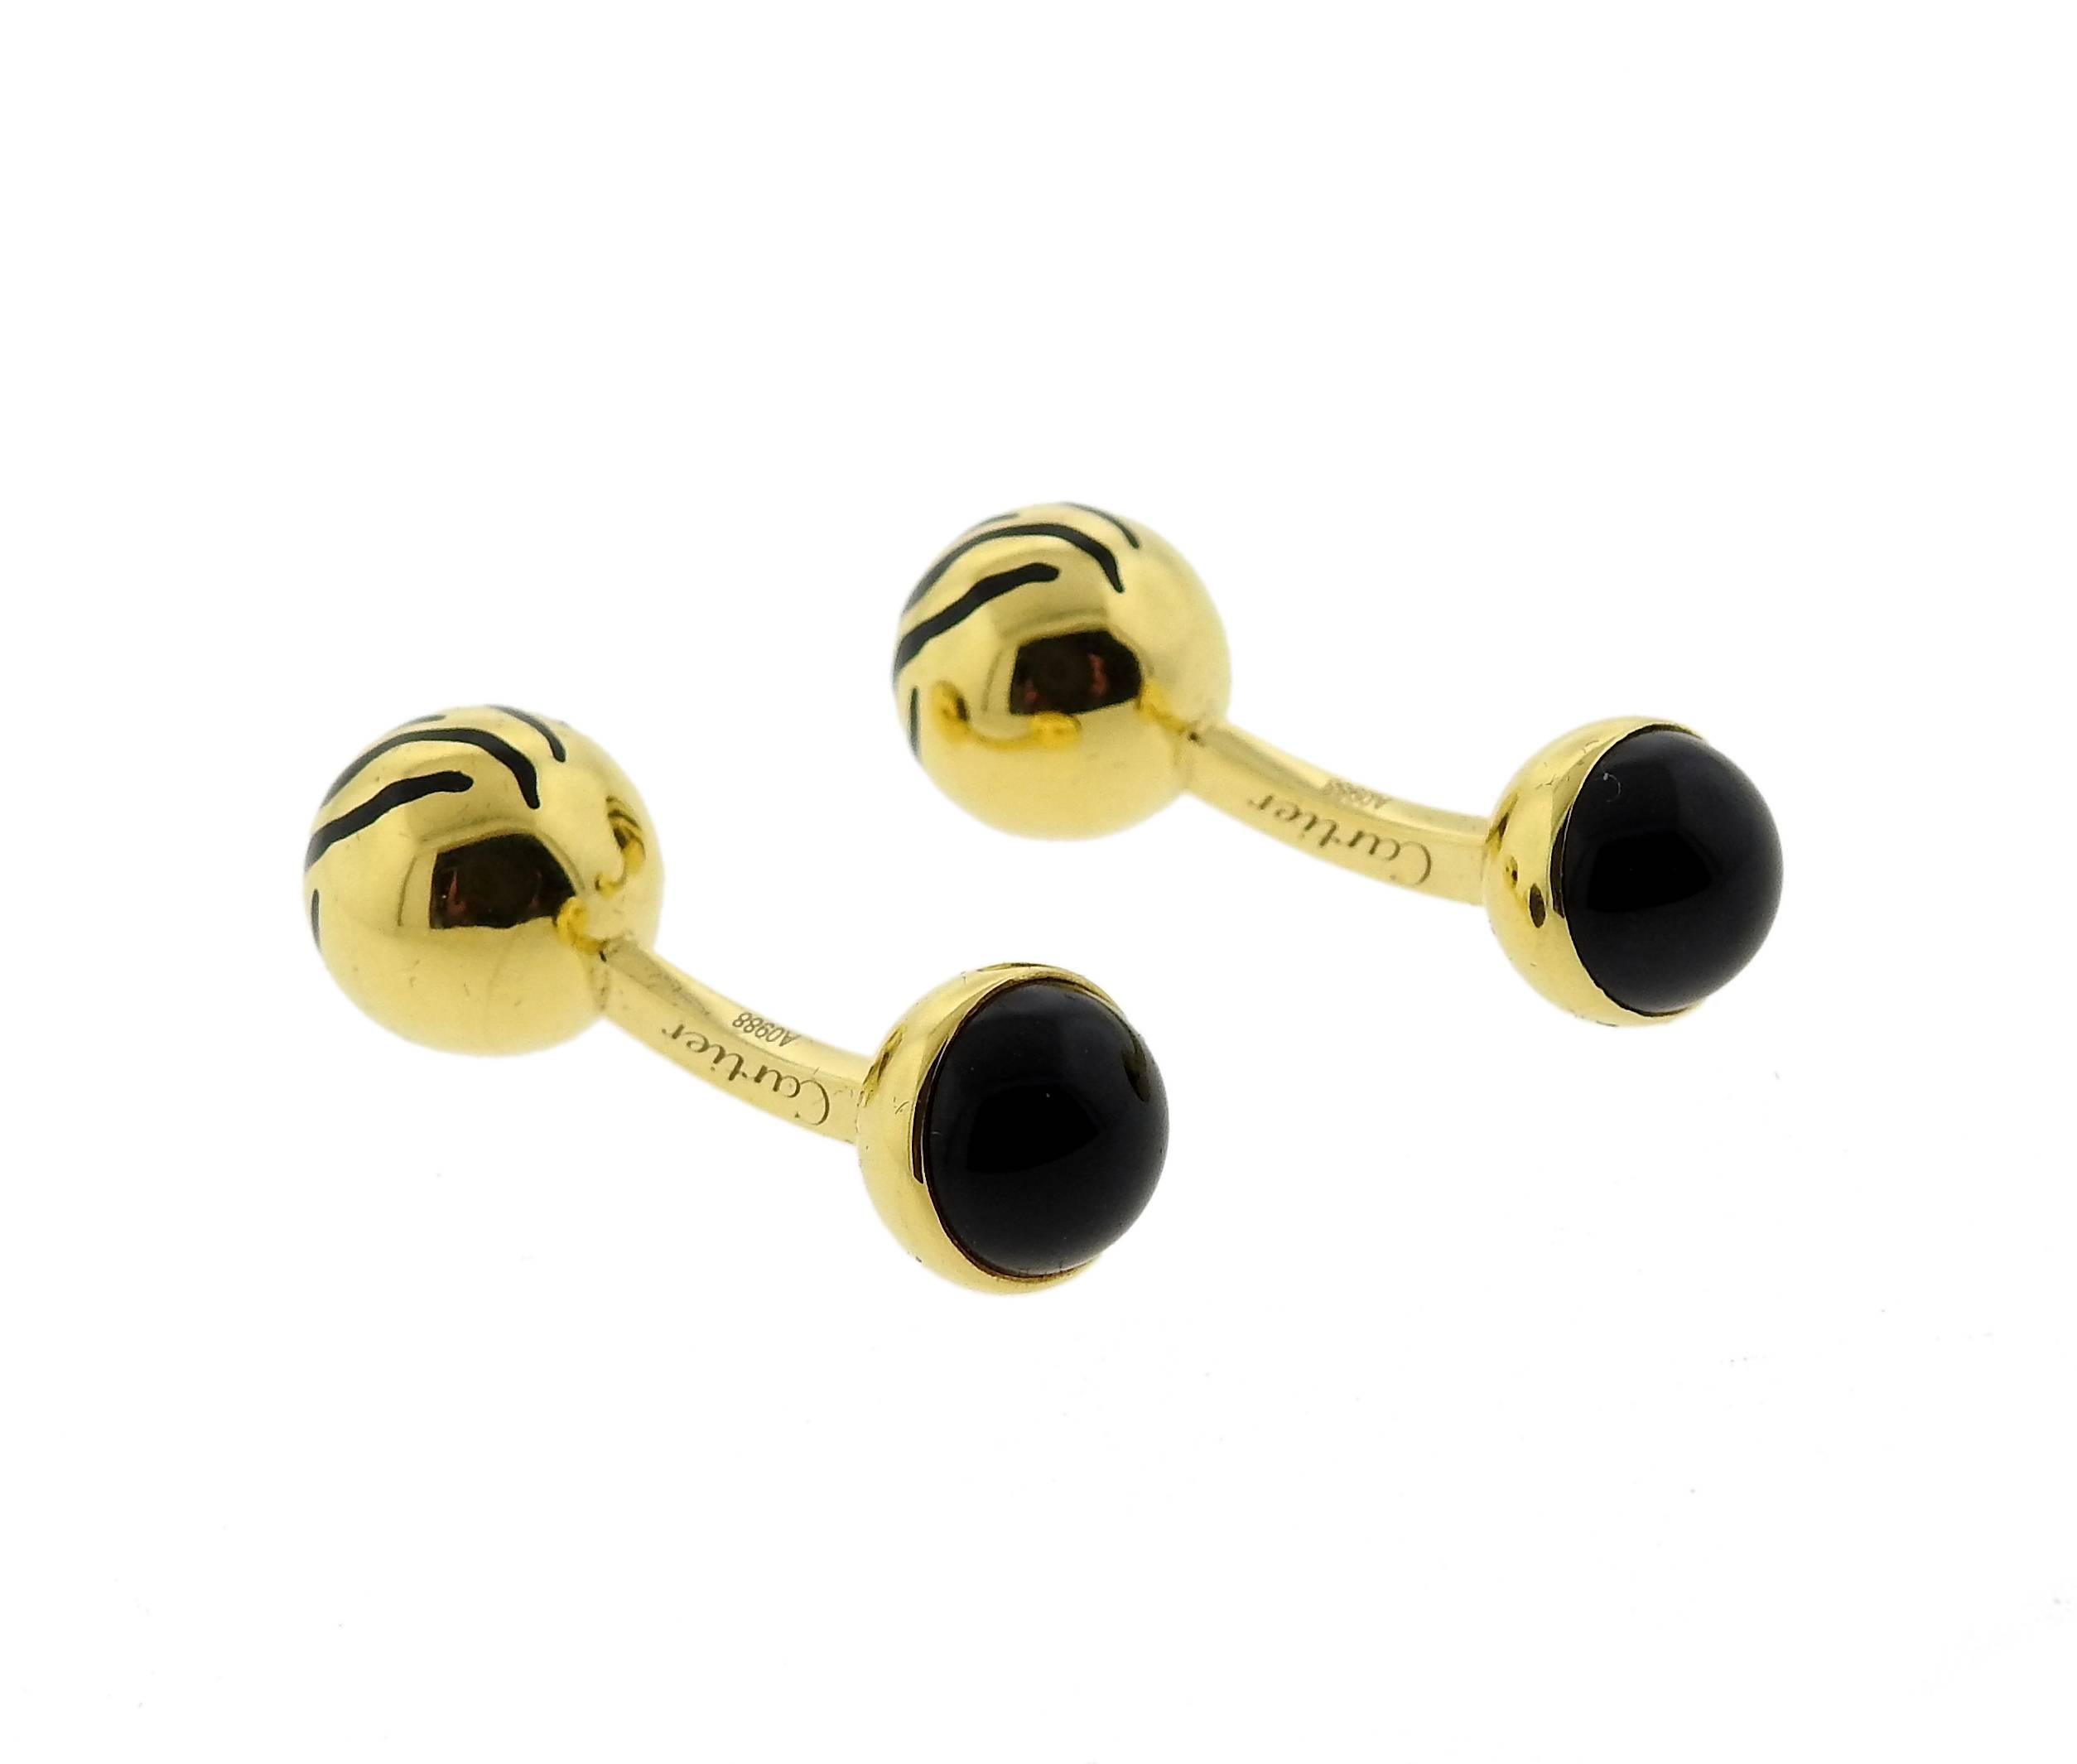 Pair of 18k yellow gold ball cufflinks, crafted by Cartier, set with black onyx. Cufflink top is 10mm in diameter, back - 9mm. Marked: Cartier, Au750, made in Italy, 4697AR. Weight - 14.8 grams 
Come with box and papers 